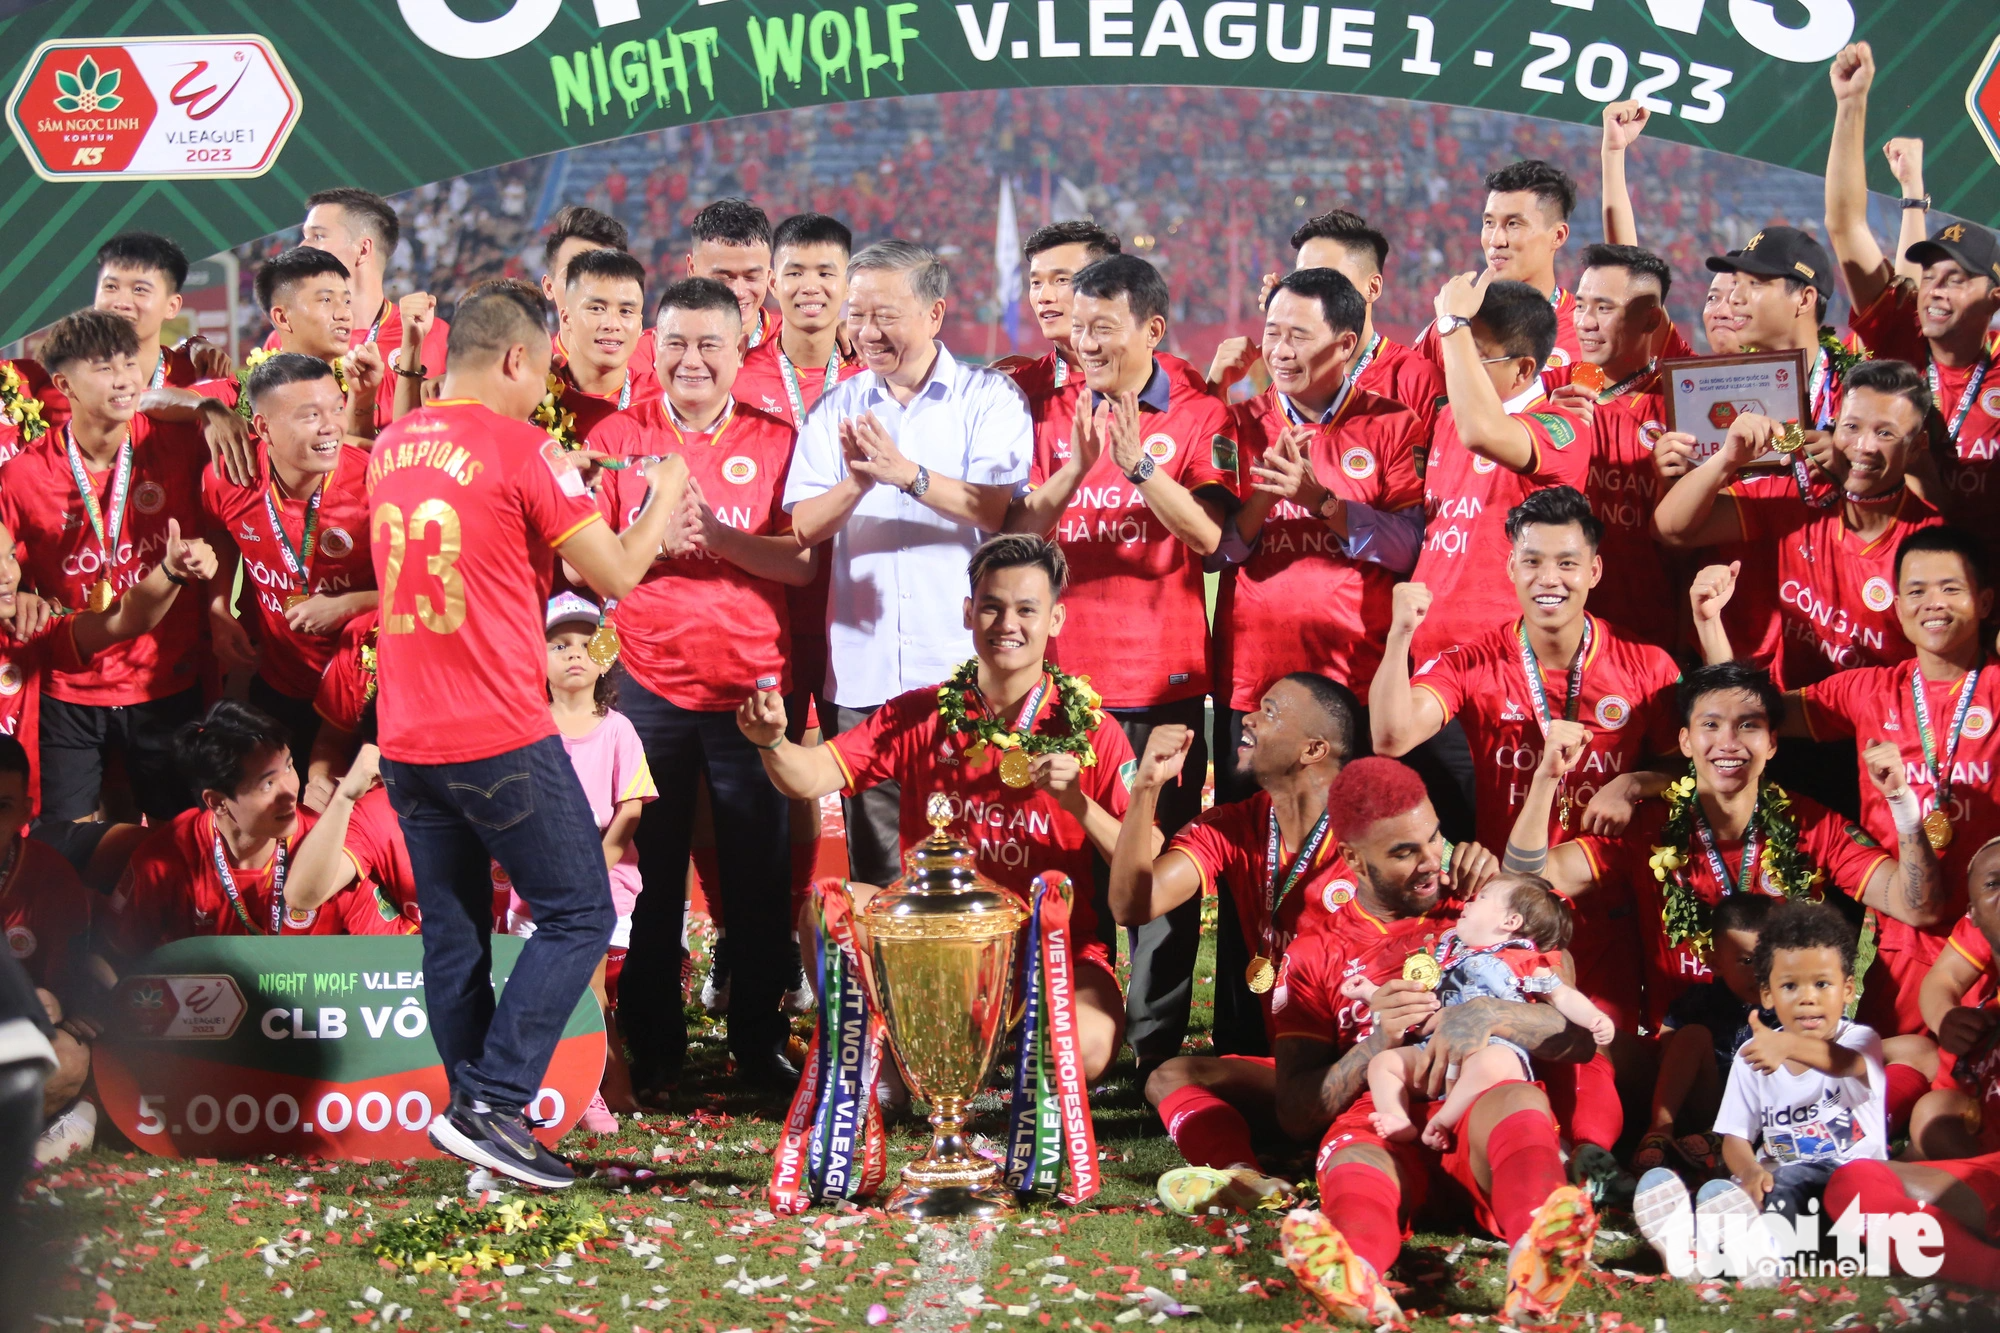 Cong An Hanoi FC players take a photo with General To Lam (in white shirt), Minister of Public Security, after winning the V-League 1 2023 at Hang Day Stadium in Hanoi, August 27, 2023. Photo: Nam Tran / Tuoi Tre